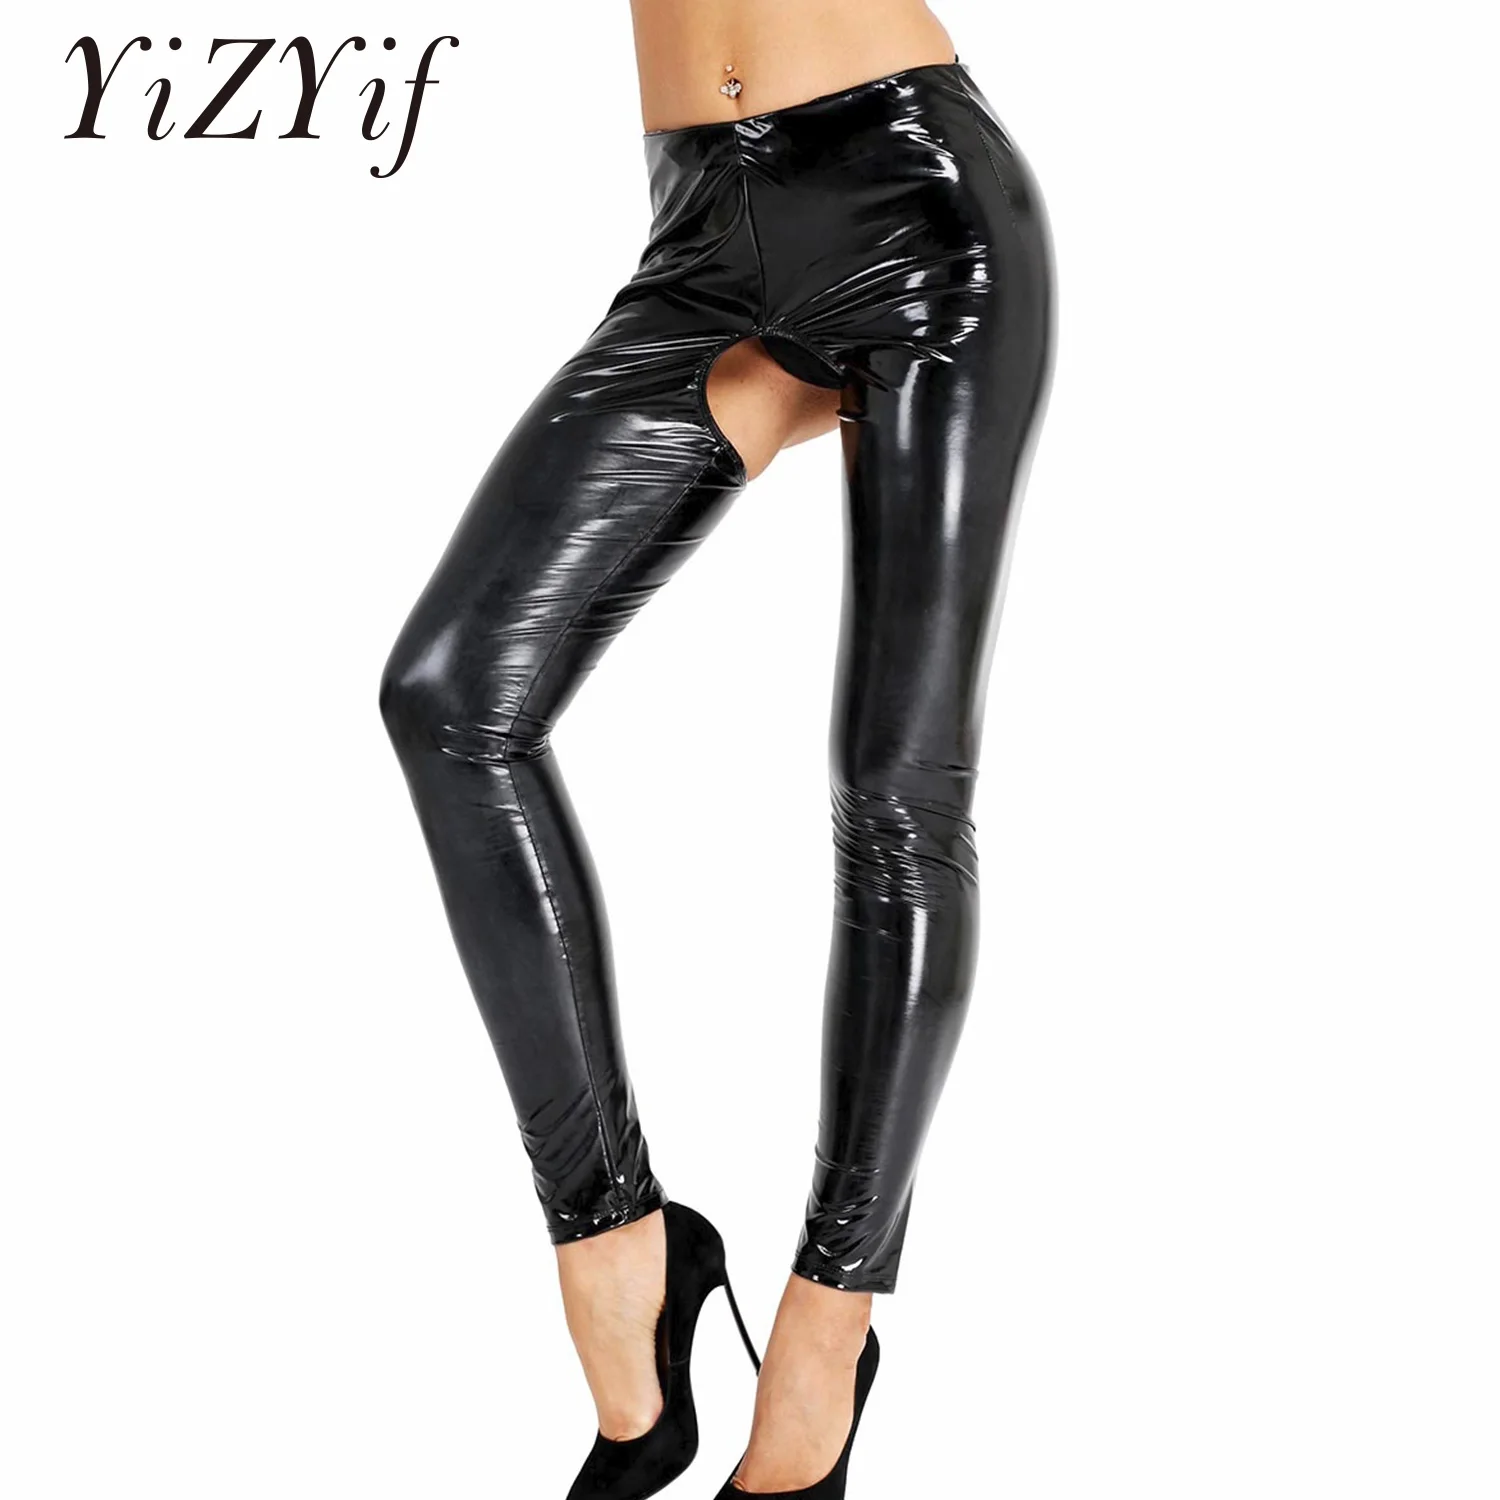 

YiZYiF Sexy Women Lingerie Wet Look Patent Leather Leggings Open Crotch And Open Butt Pants Skinny Stretchy Legging Trousers